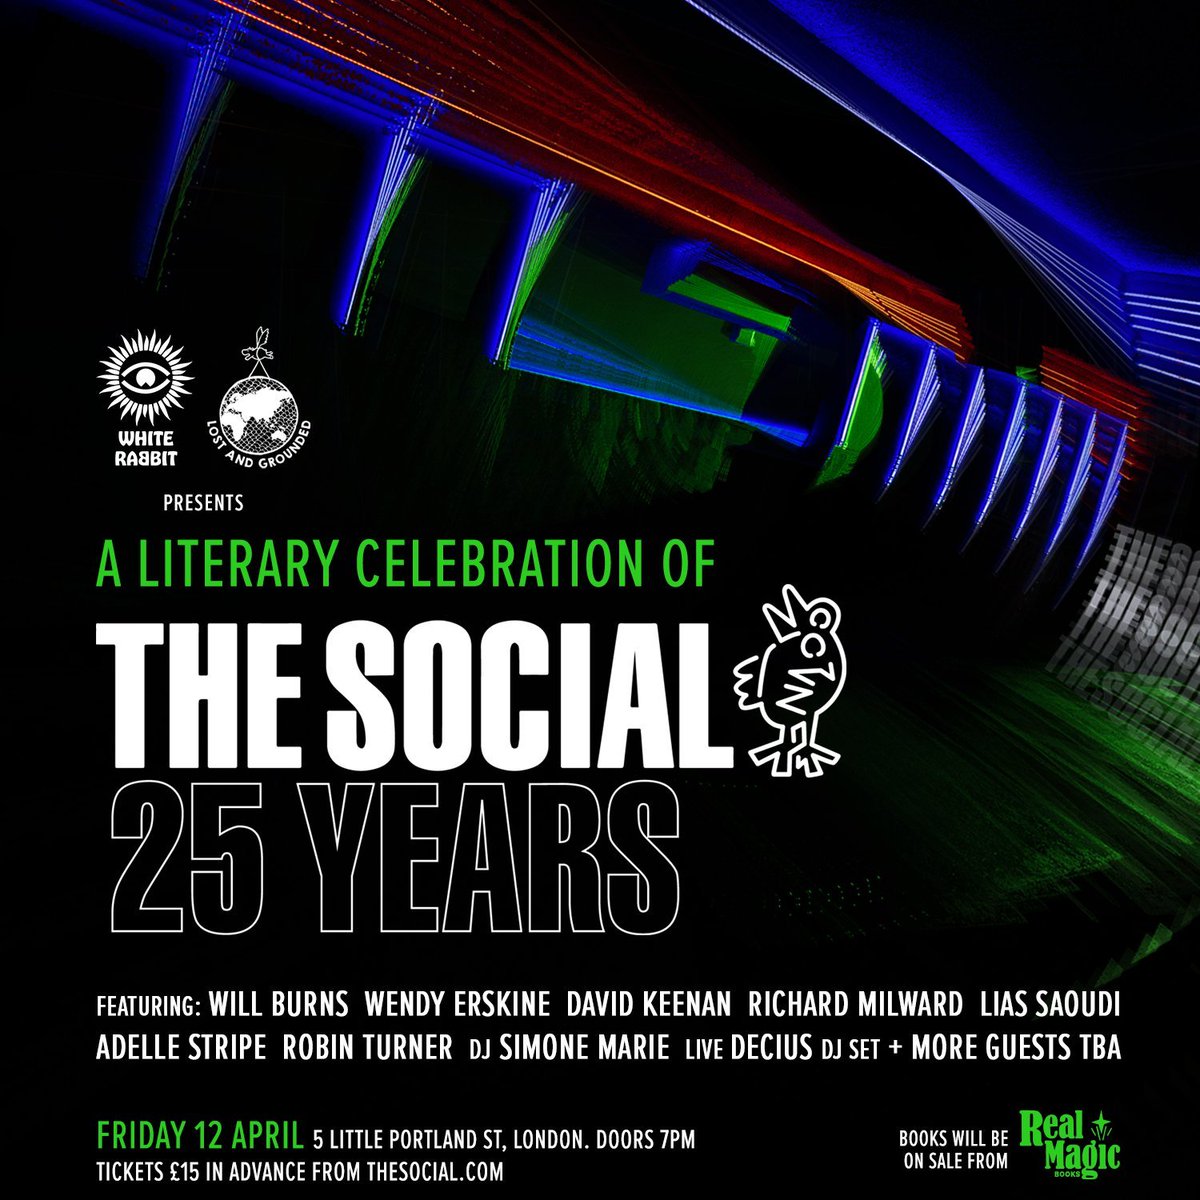 FINAL CALL for Friday's big celebration of @thesocial... We're nearly sold out so do grab a ticket ASAP if you want to join us and see @reversediorama @WednesdayErskin @adellestripe + more, as we raise a glass to one of the finest venues in the world 🍻 thesocial.seetickets.com/event/a-litera…